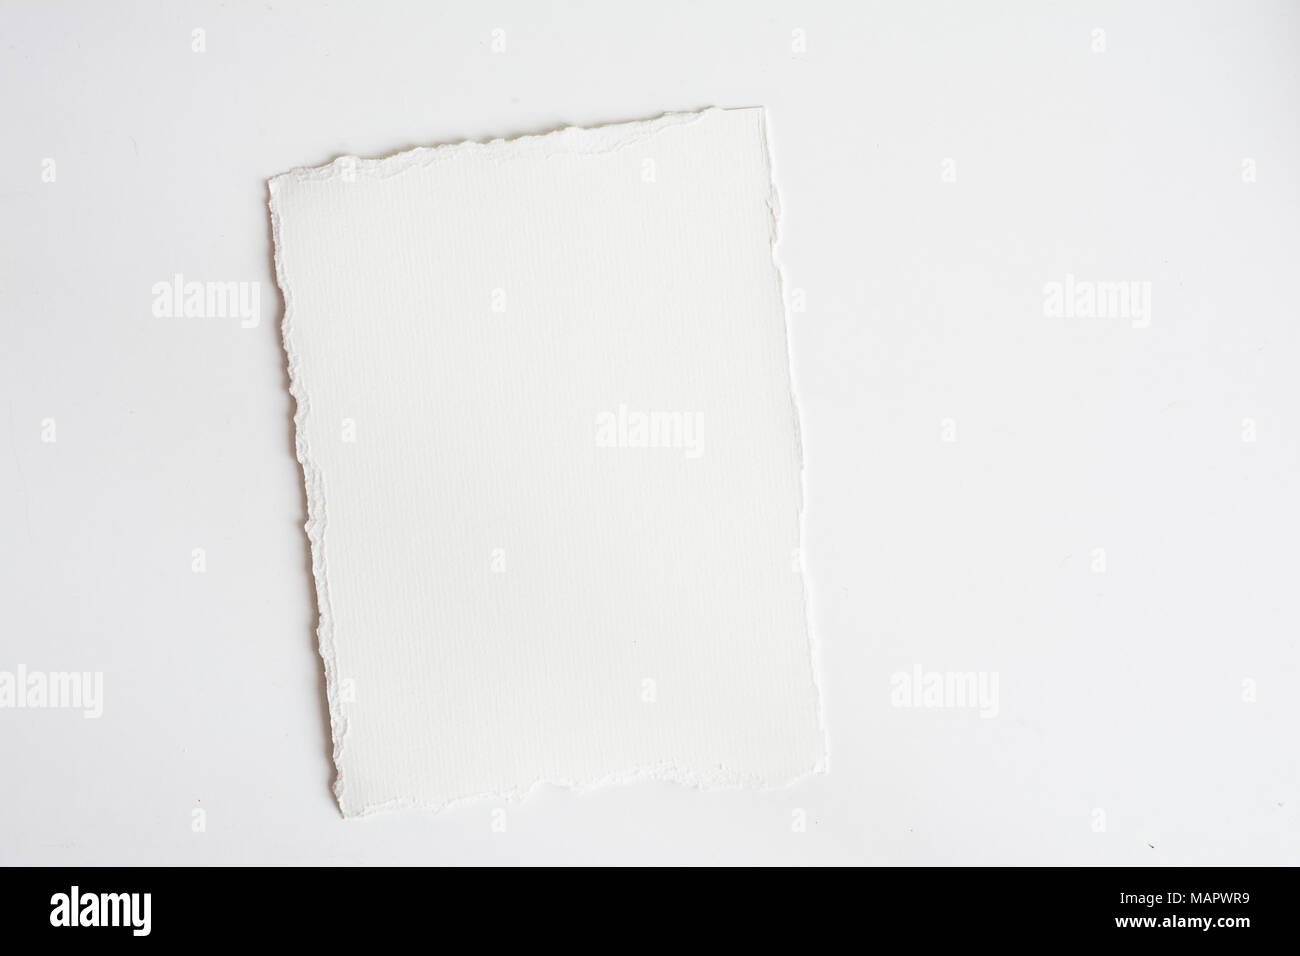 White design paper on a clear white table Stock Photo